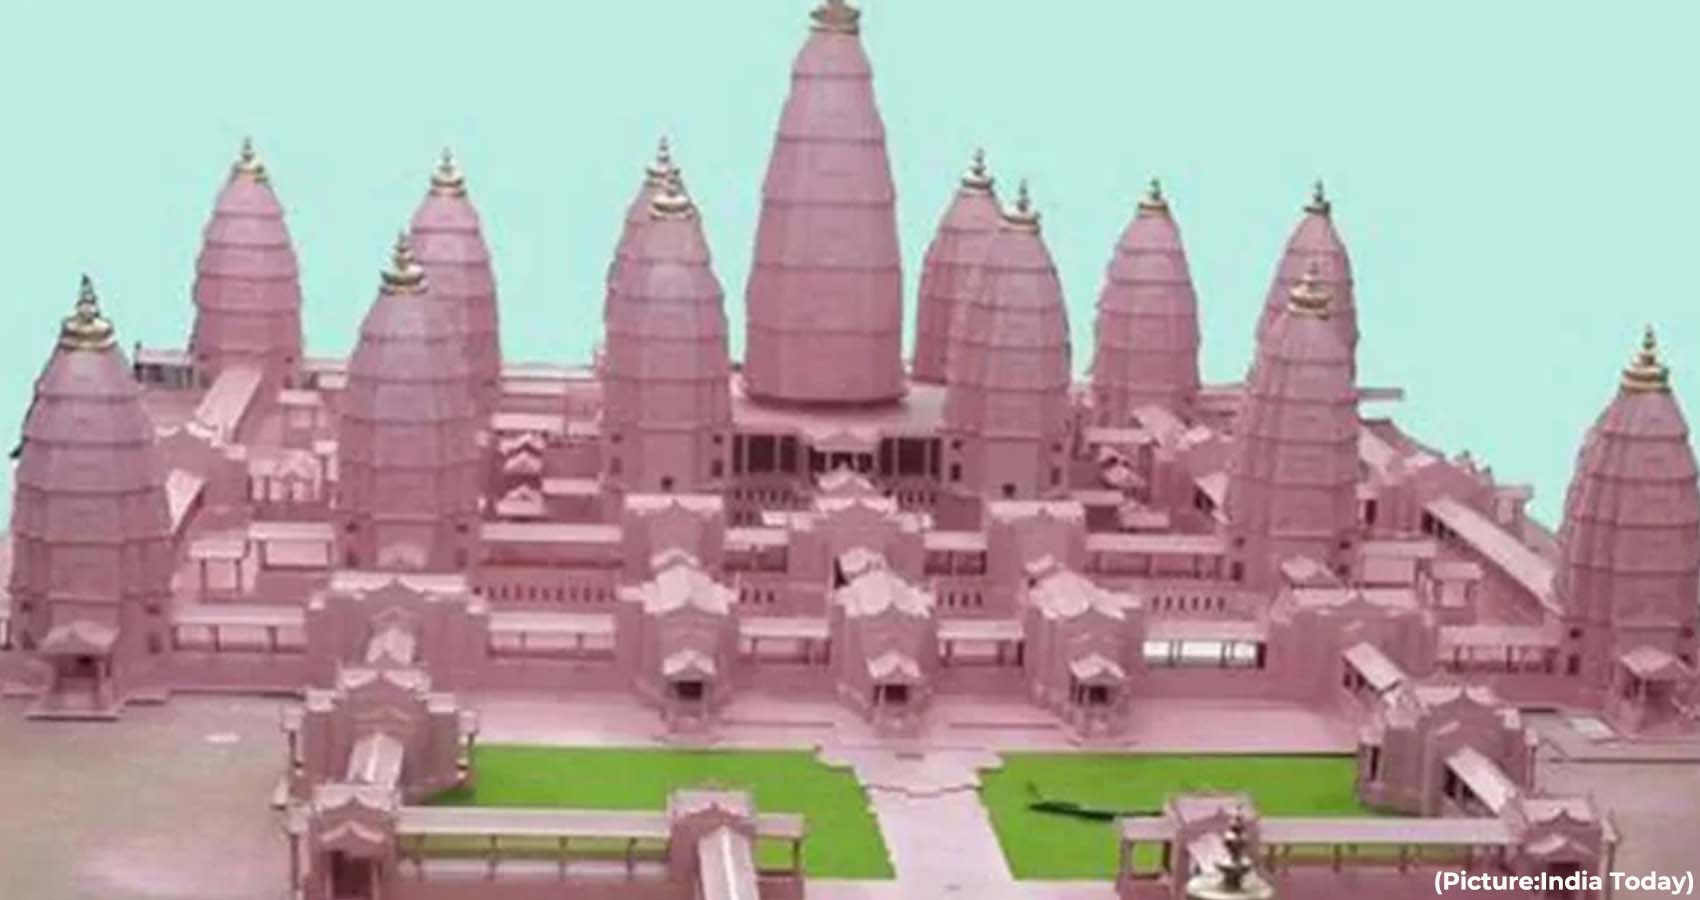 Muslim Family In India Donates Land To Build ‘World’s Largest Hindu Temple’, Taller Than Angkor Vat